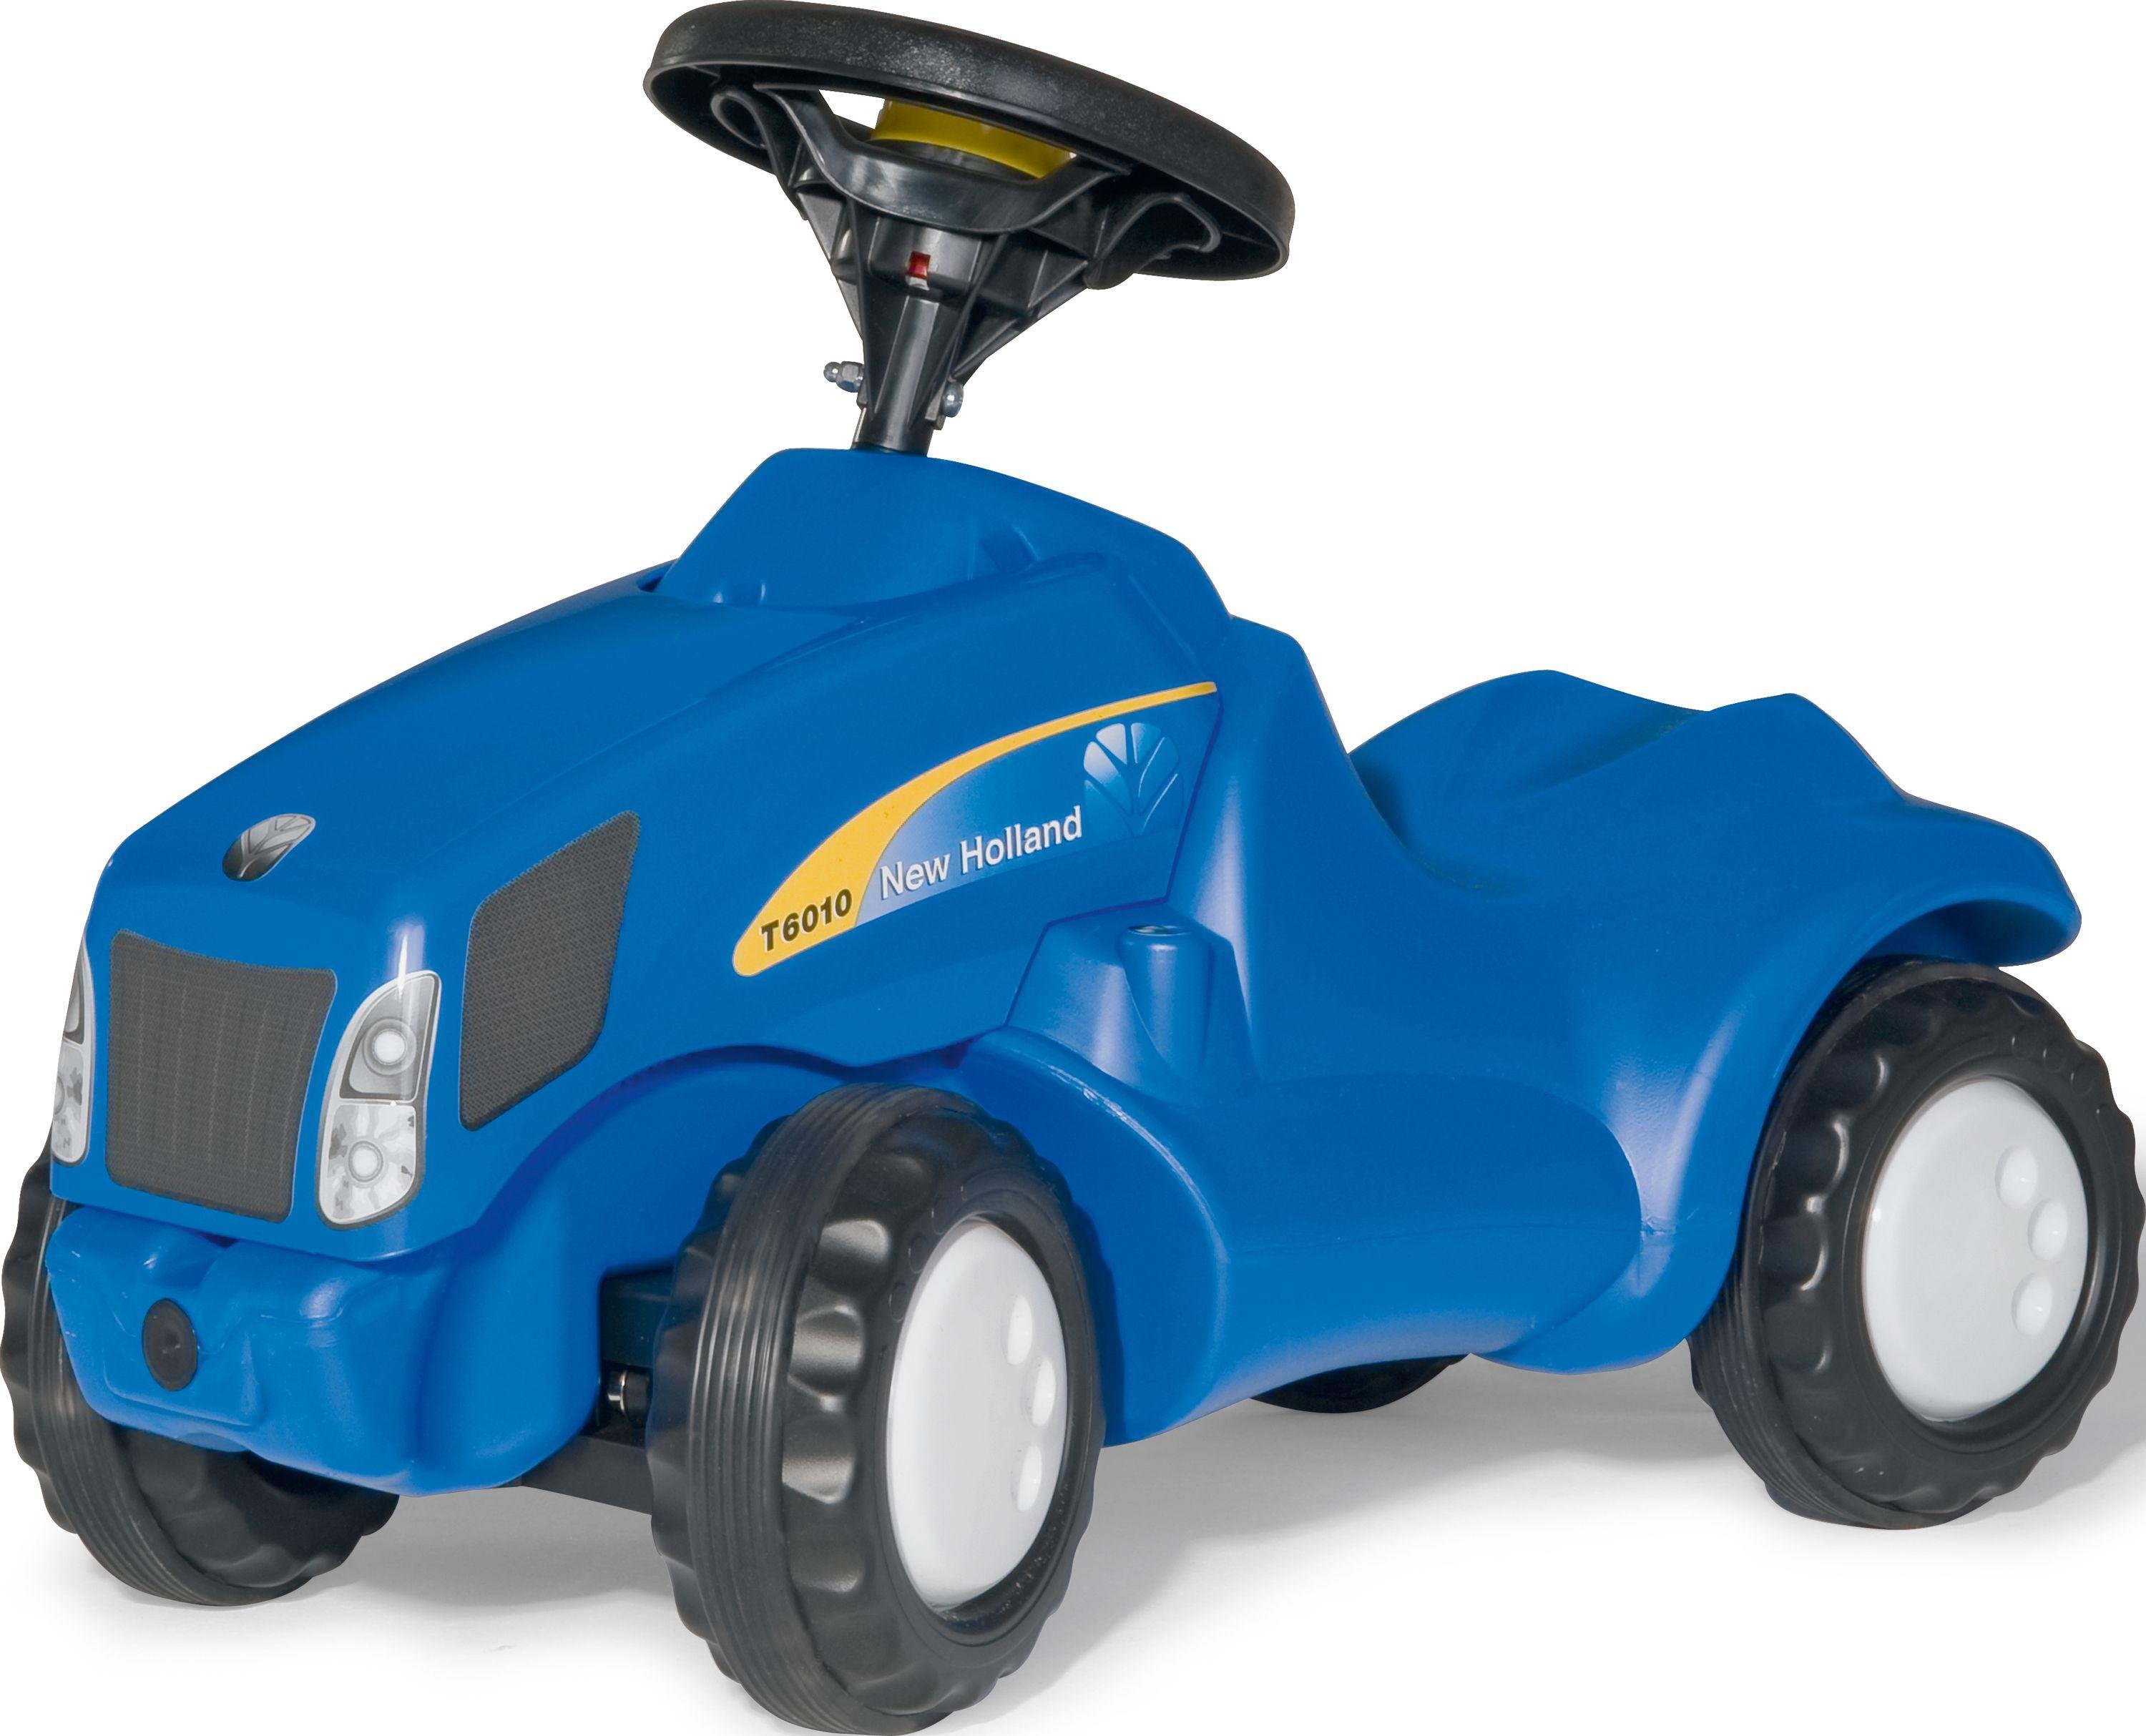 New Holland TVT155 Mini Trac Child's Tractor. review